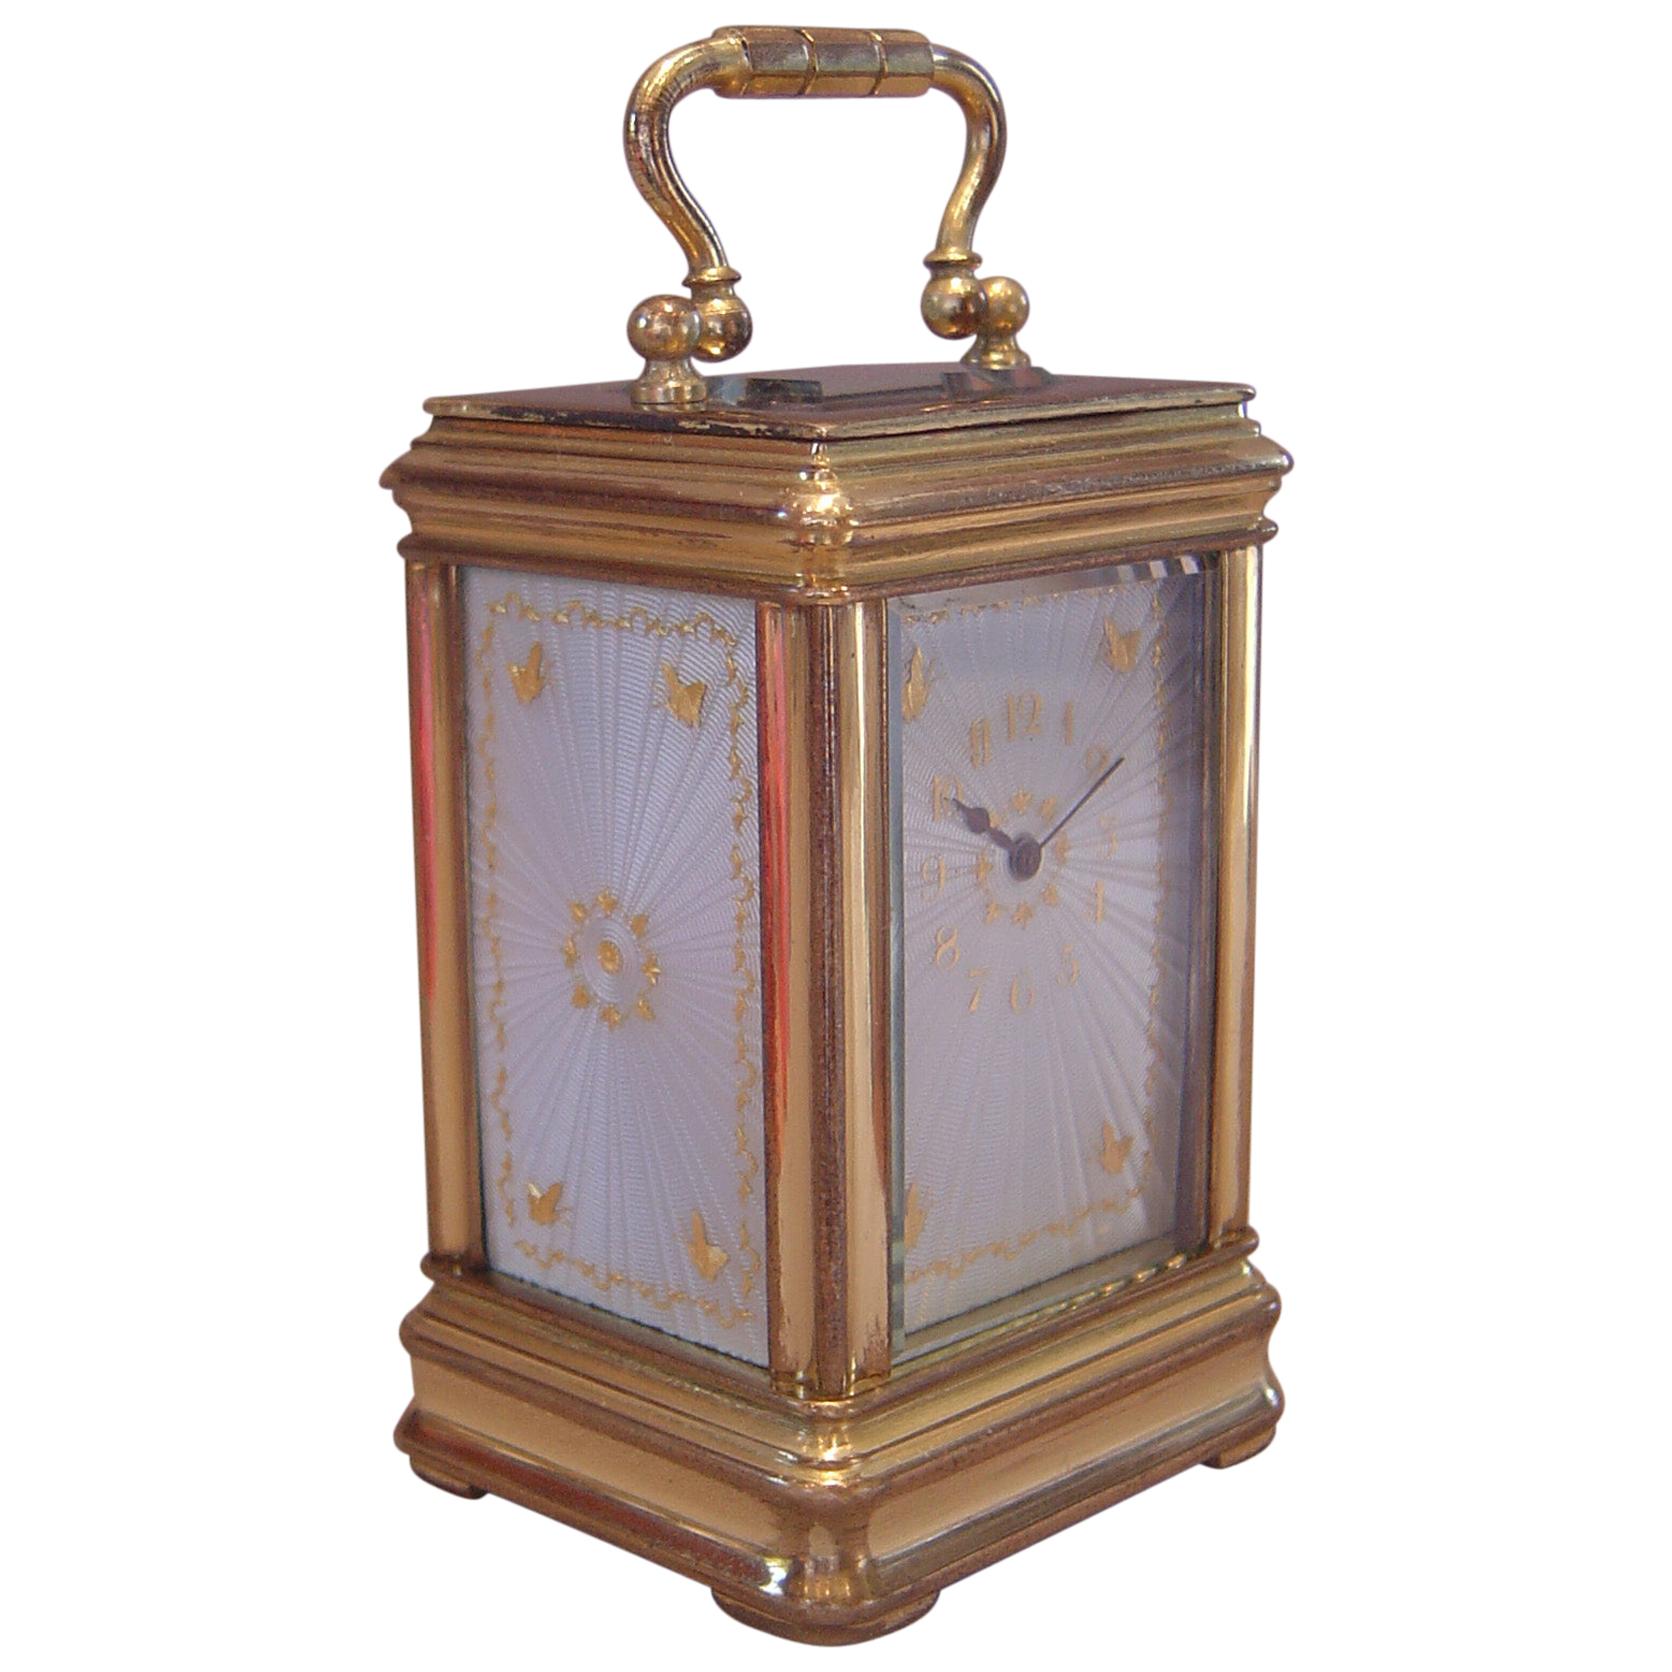 Miniature Carriage Clock with Guilloche Panels